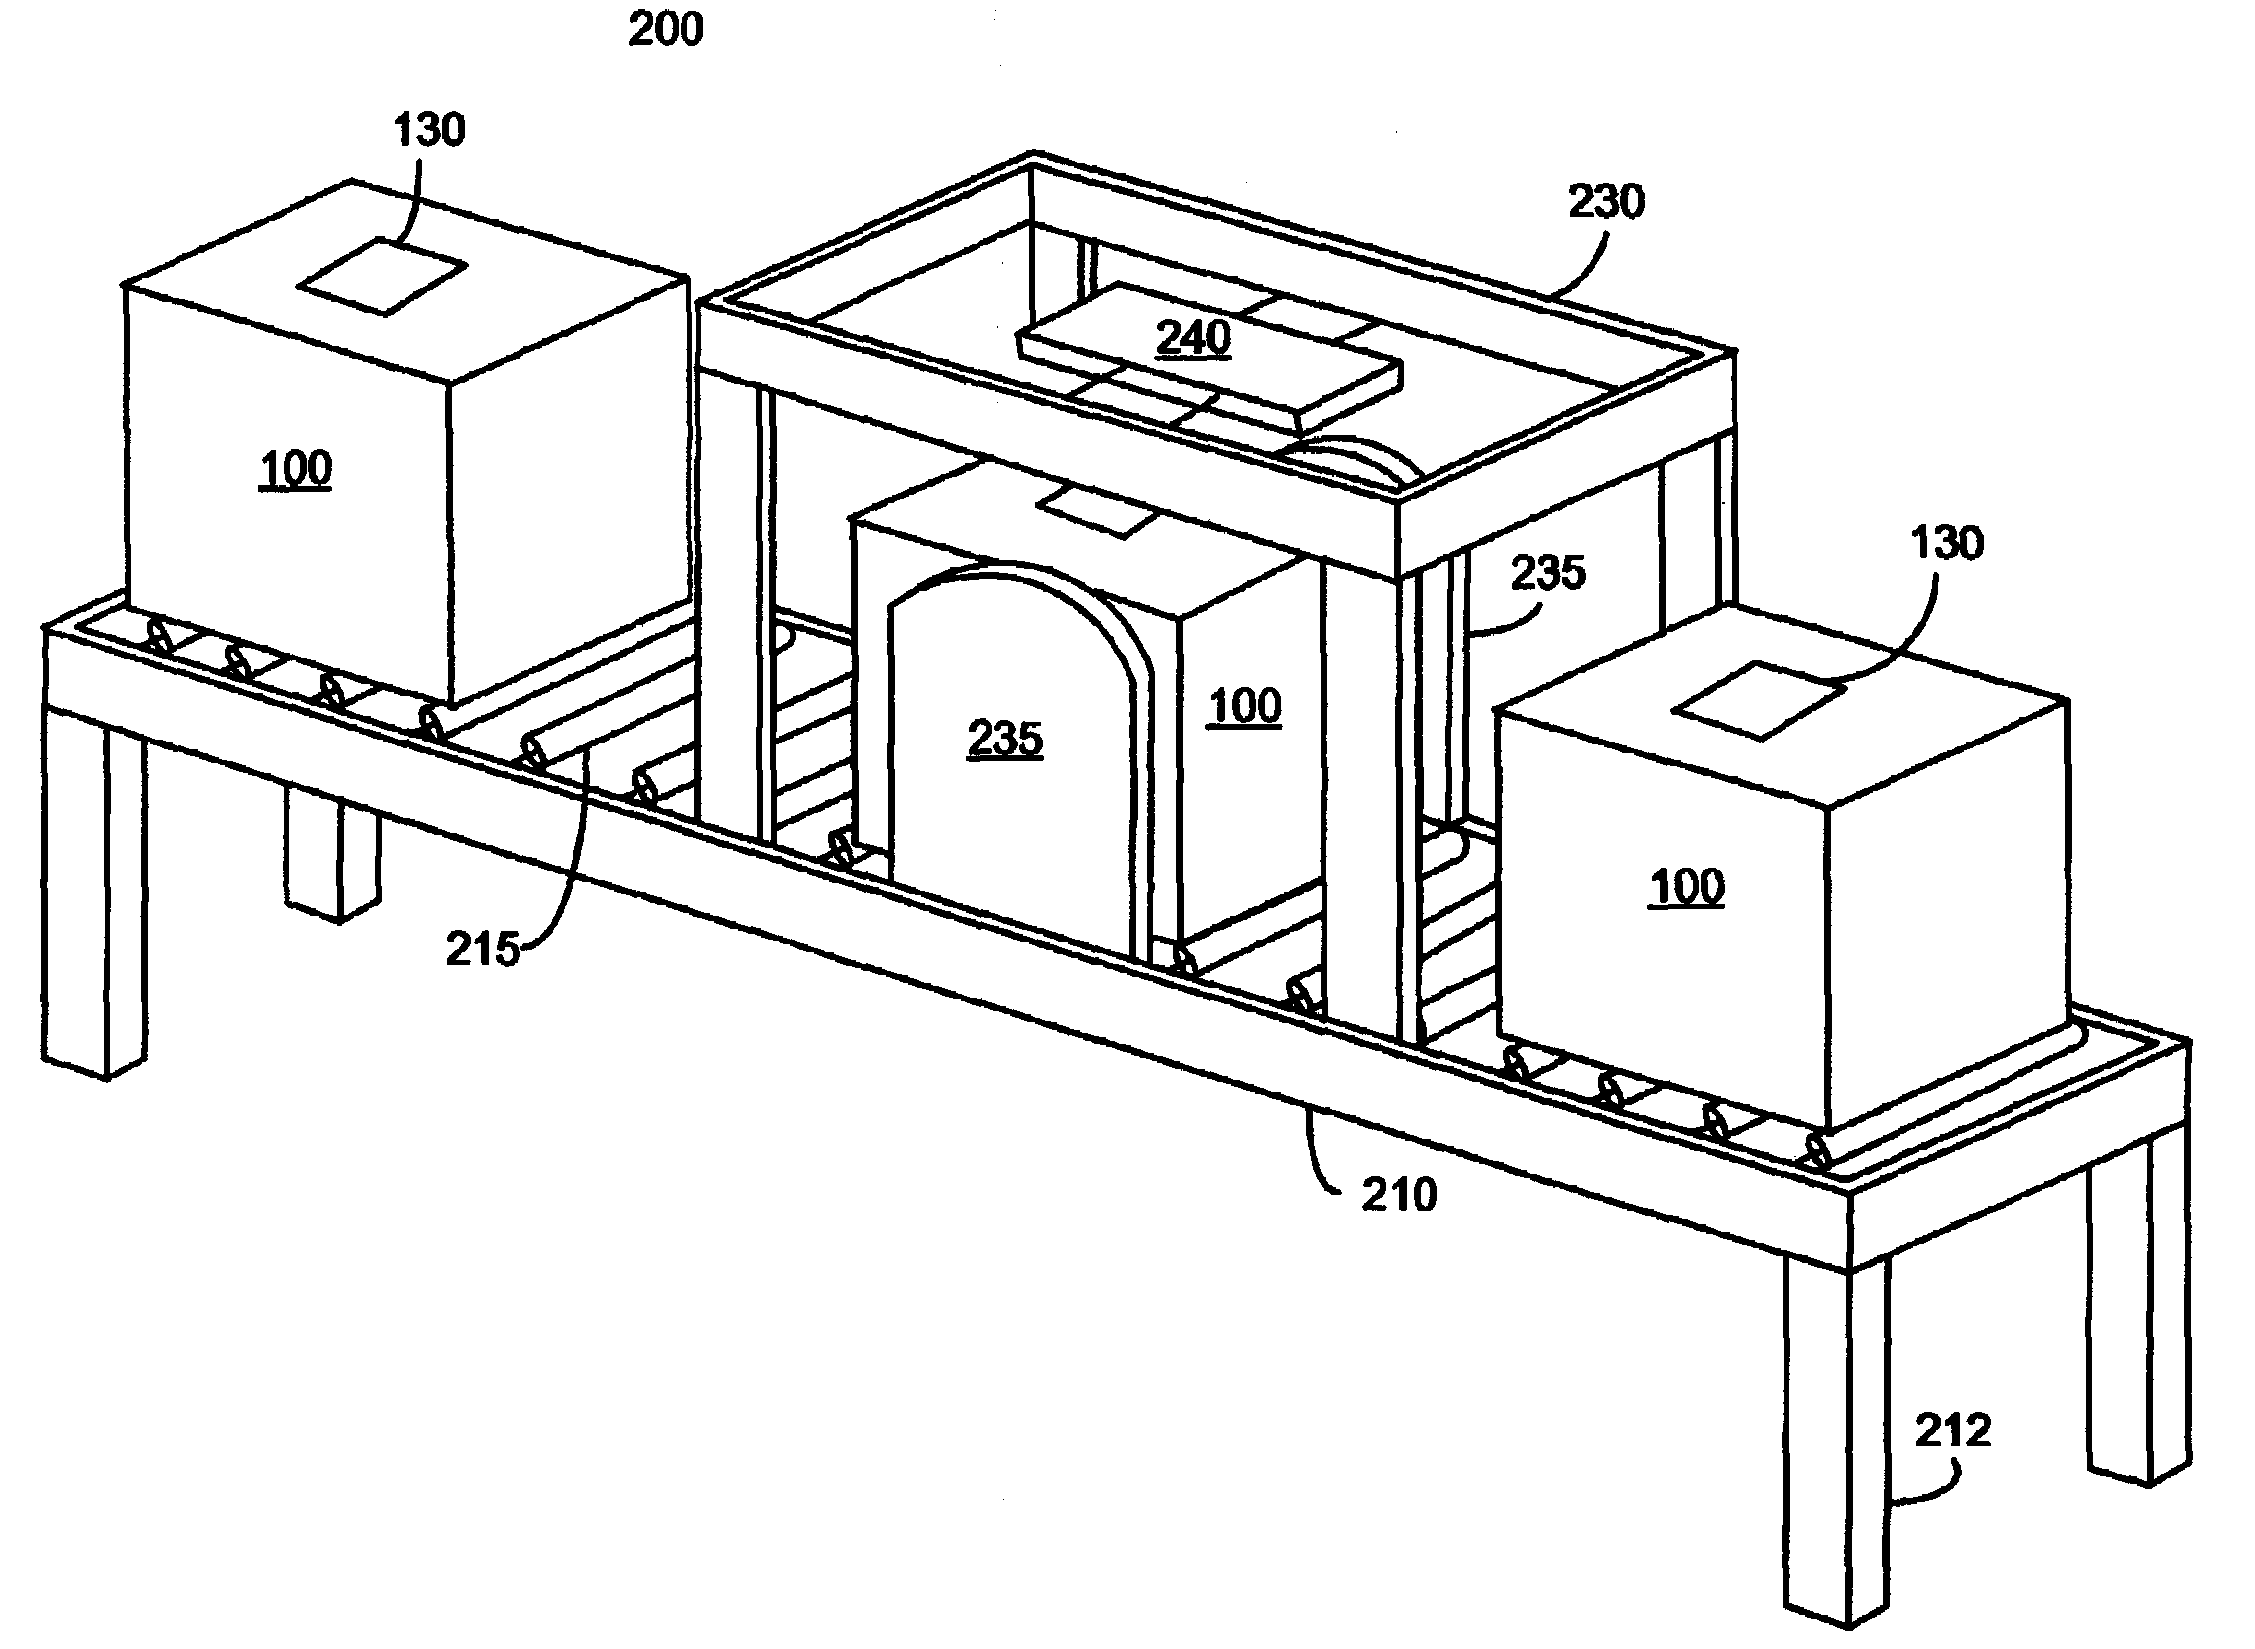 Control system for an RFID-based system for assembling and verifying outbound surgical equipment corresponding to a particular surgery